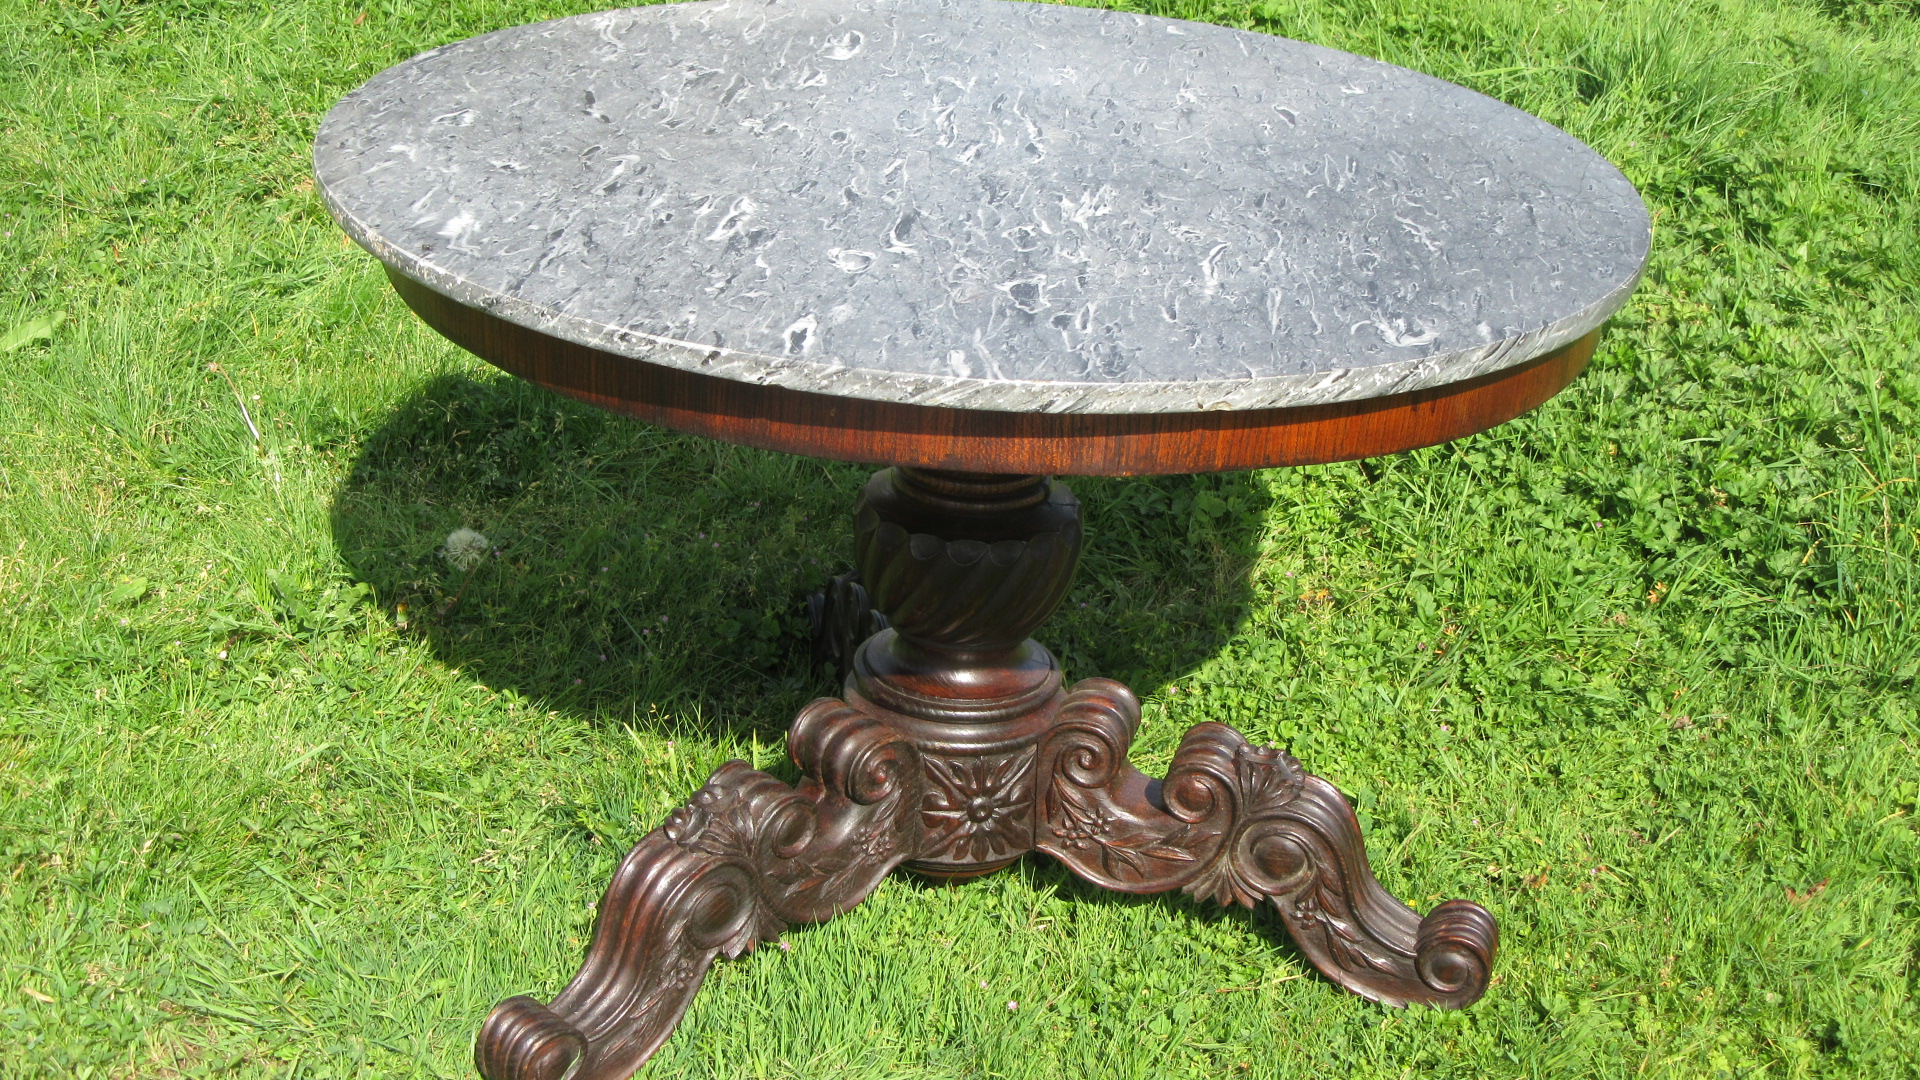 ANTIQUE FRENCH GUERIDON TABLE